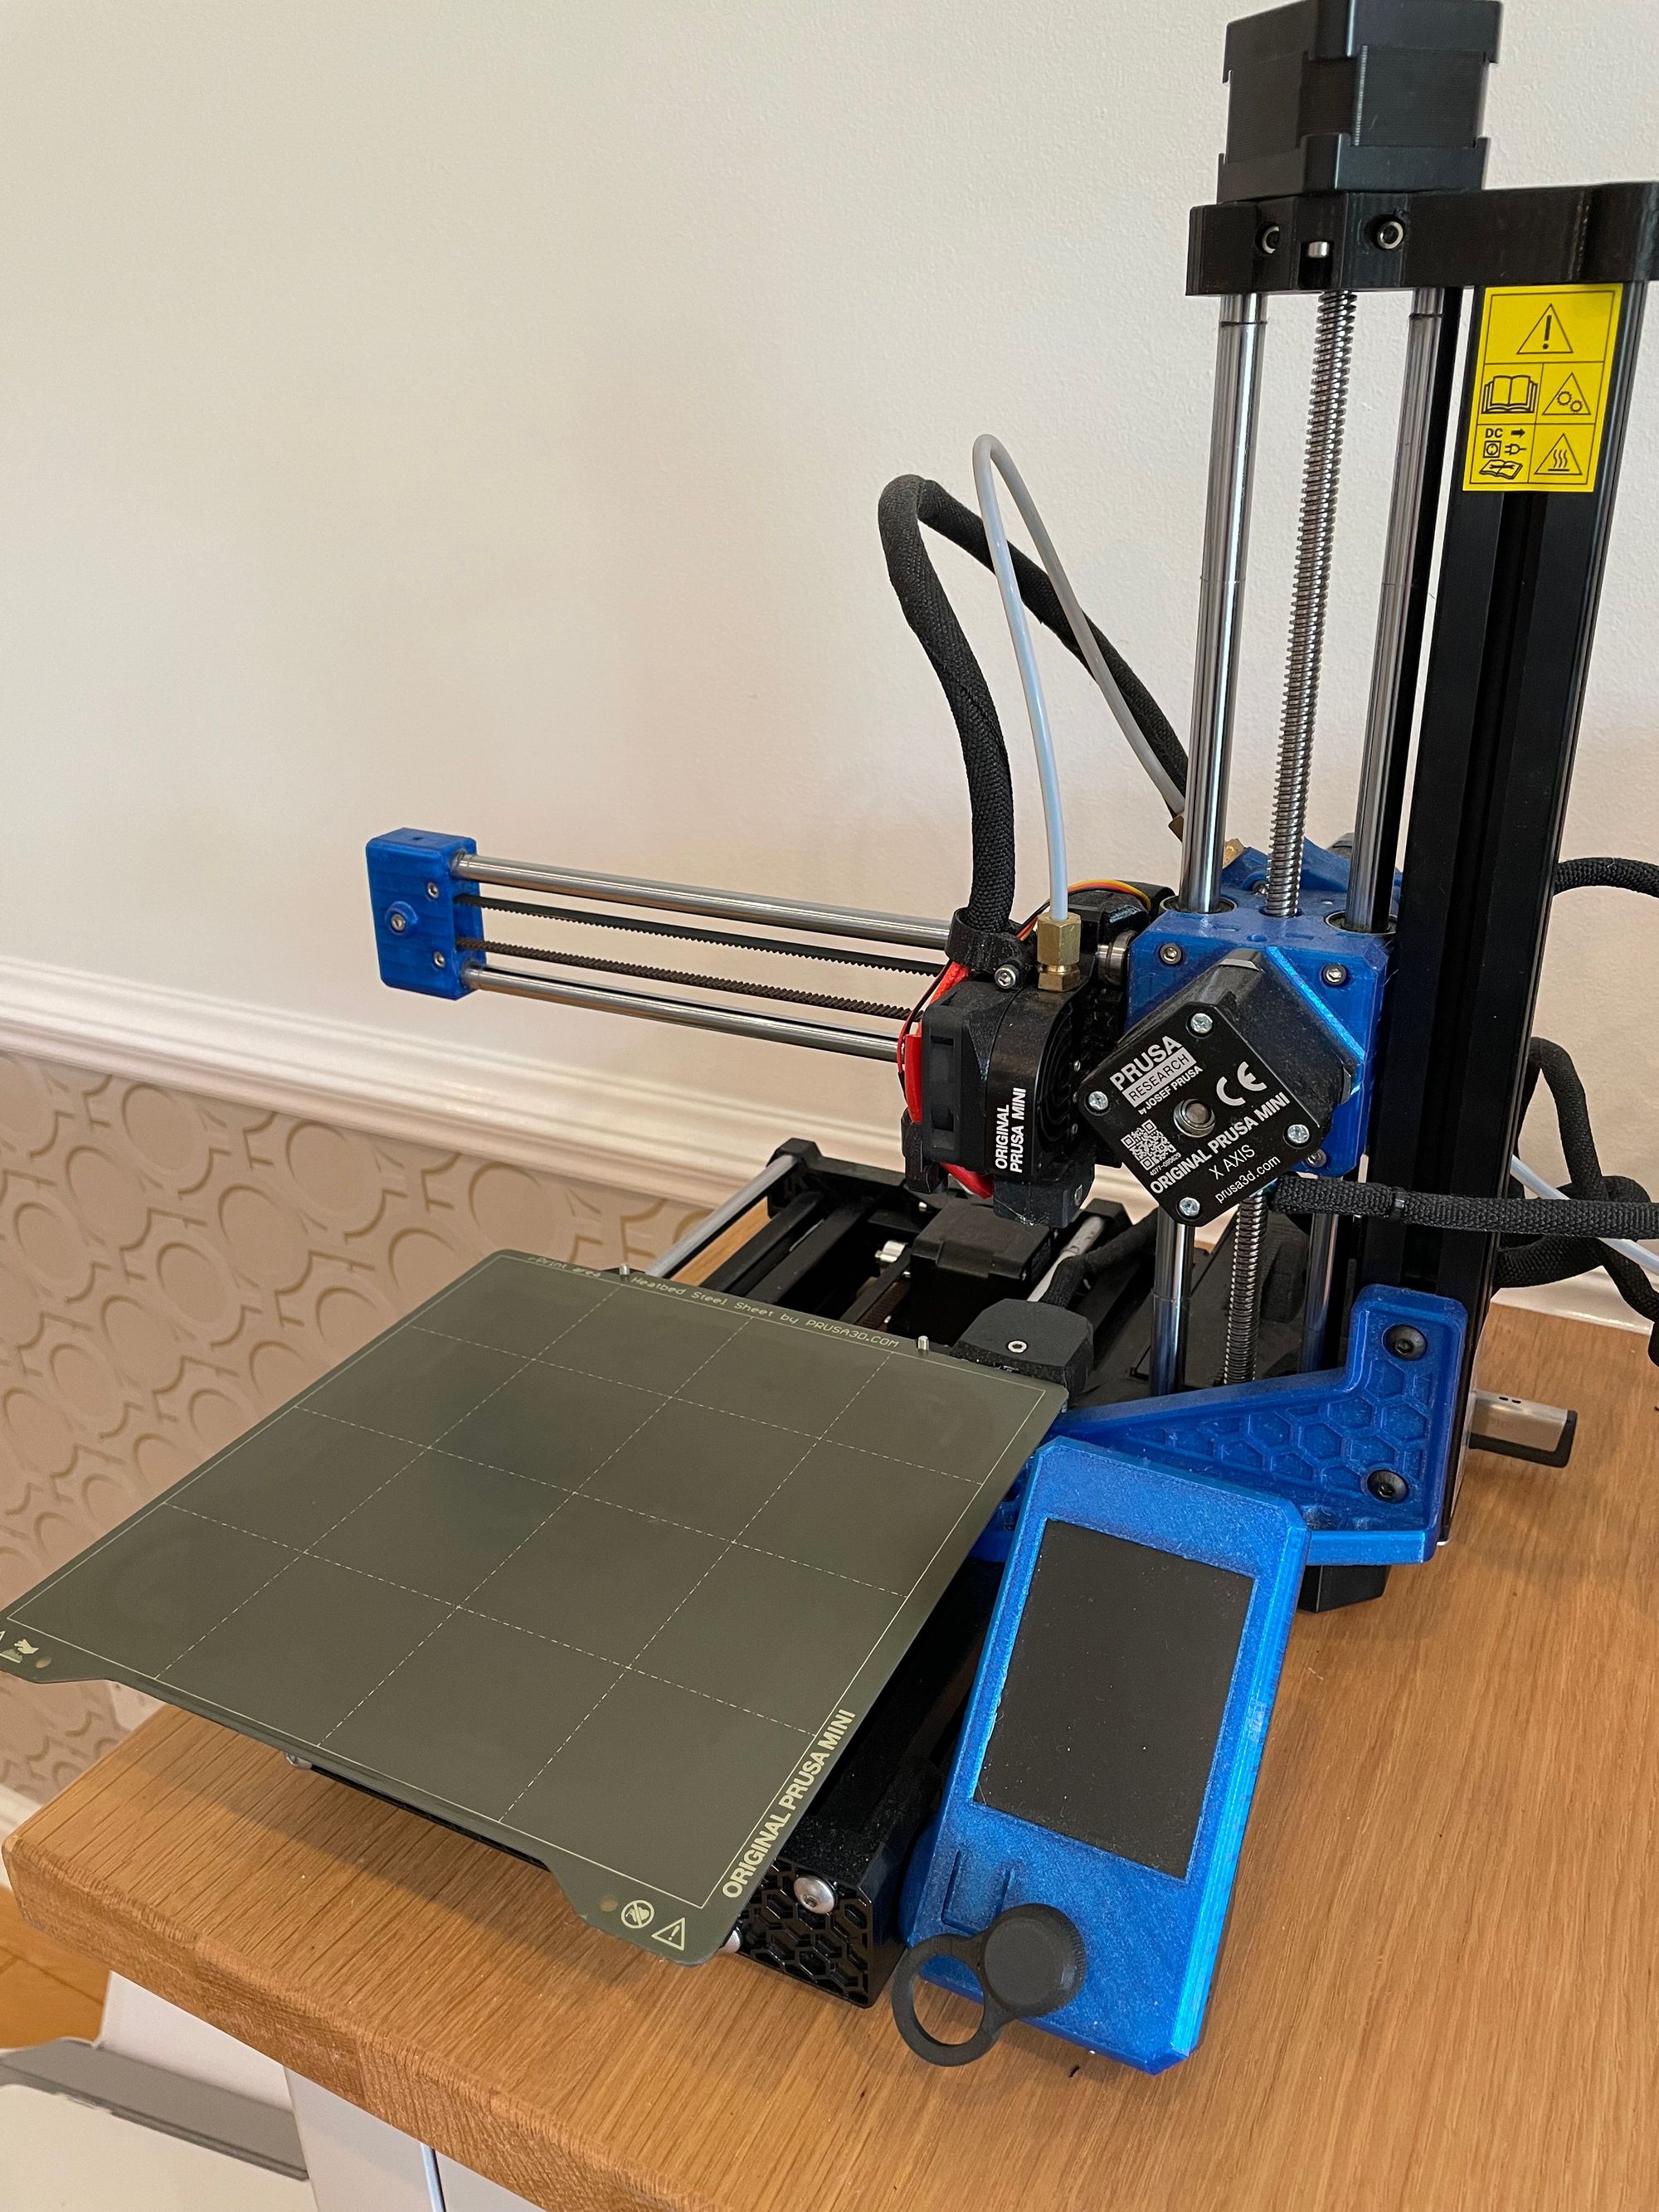 Prusa Mini+ 3D-printer with blue components